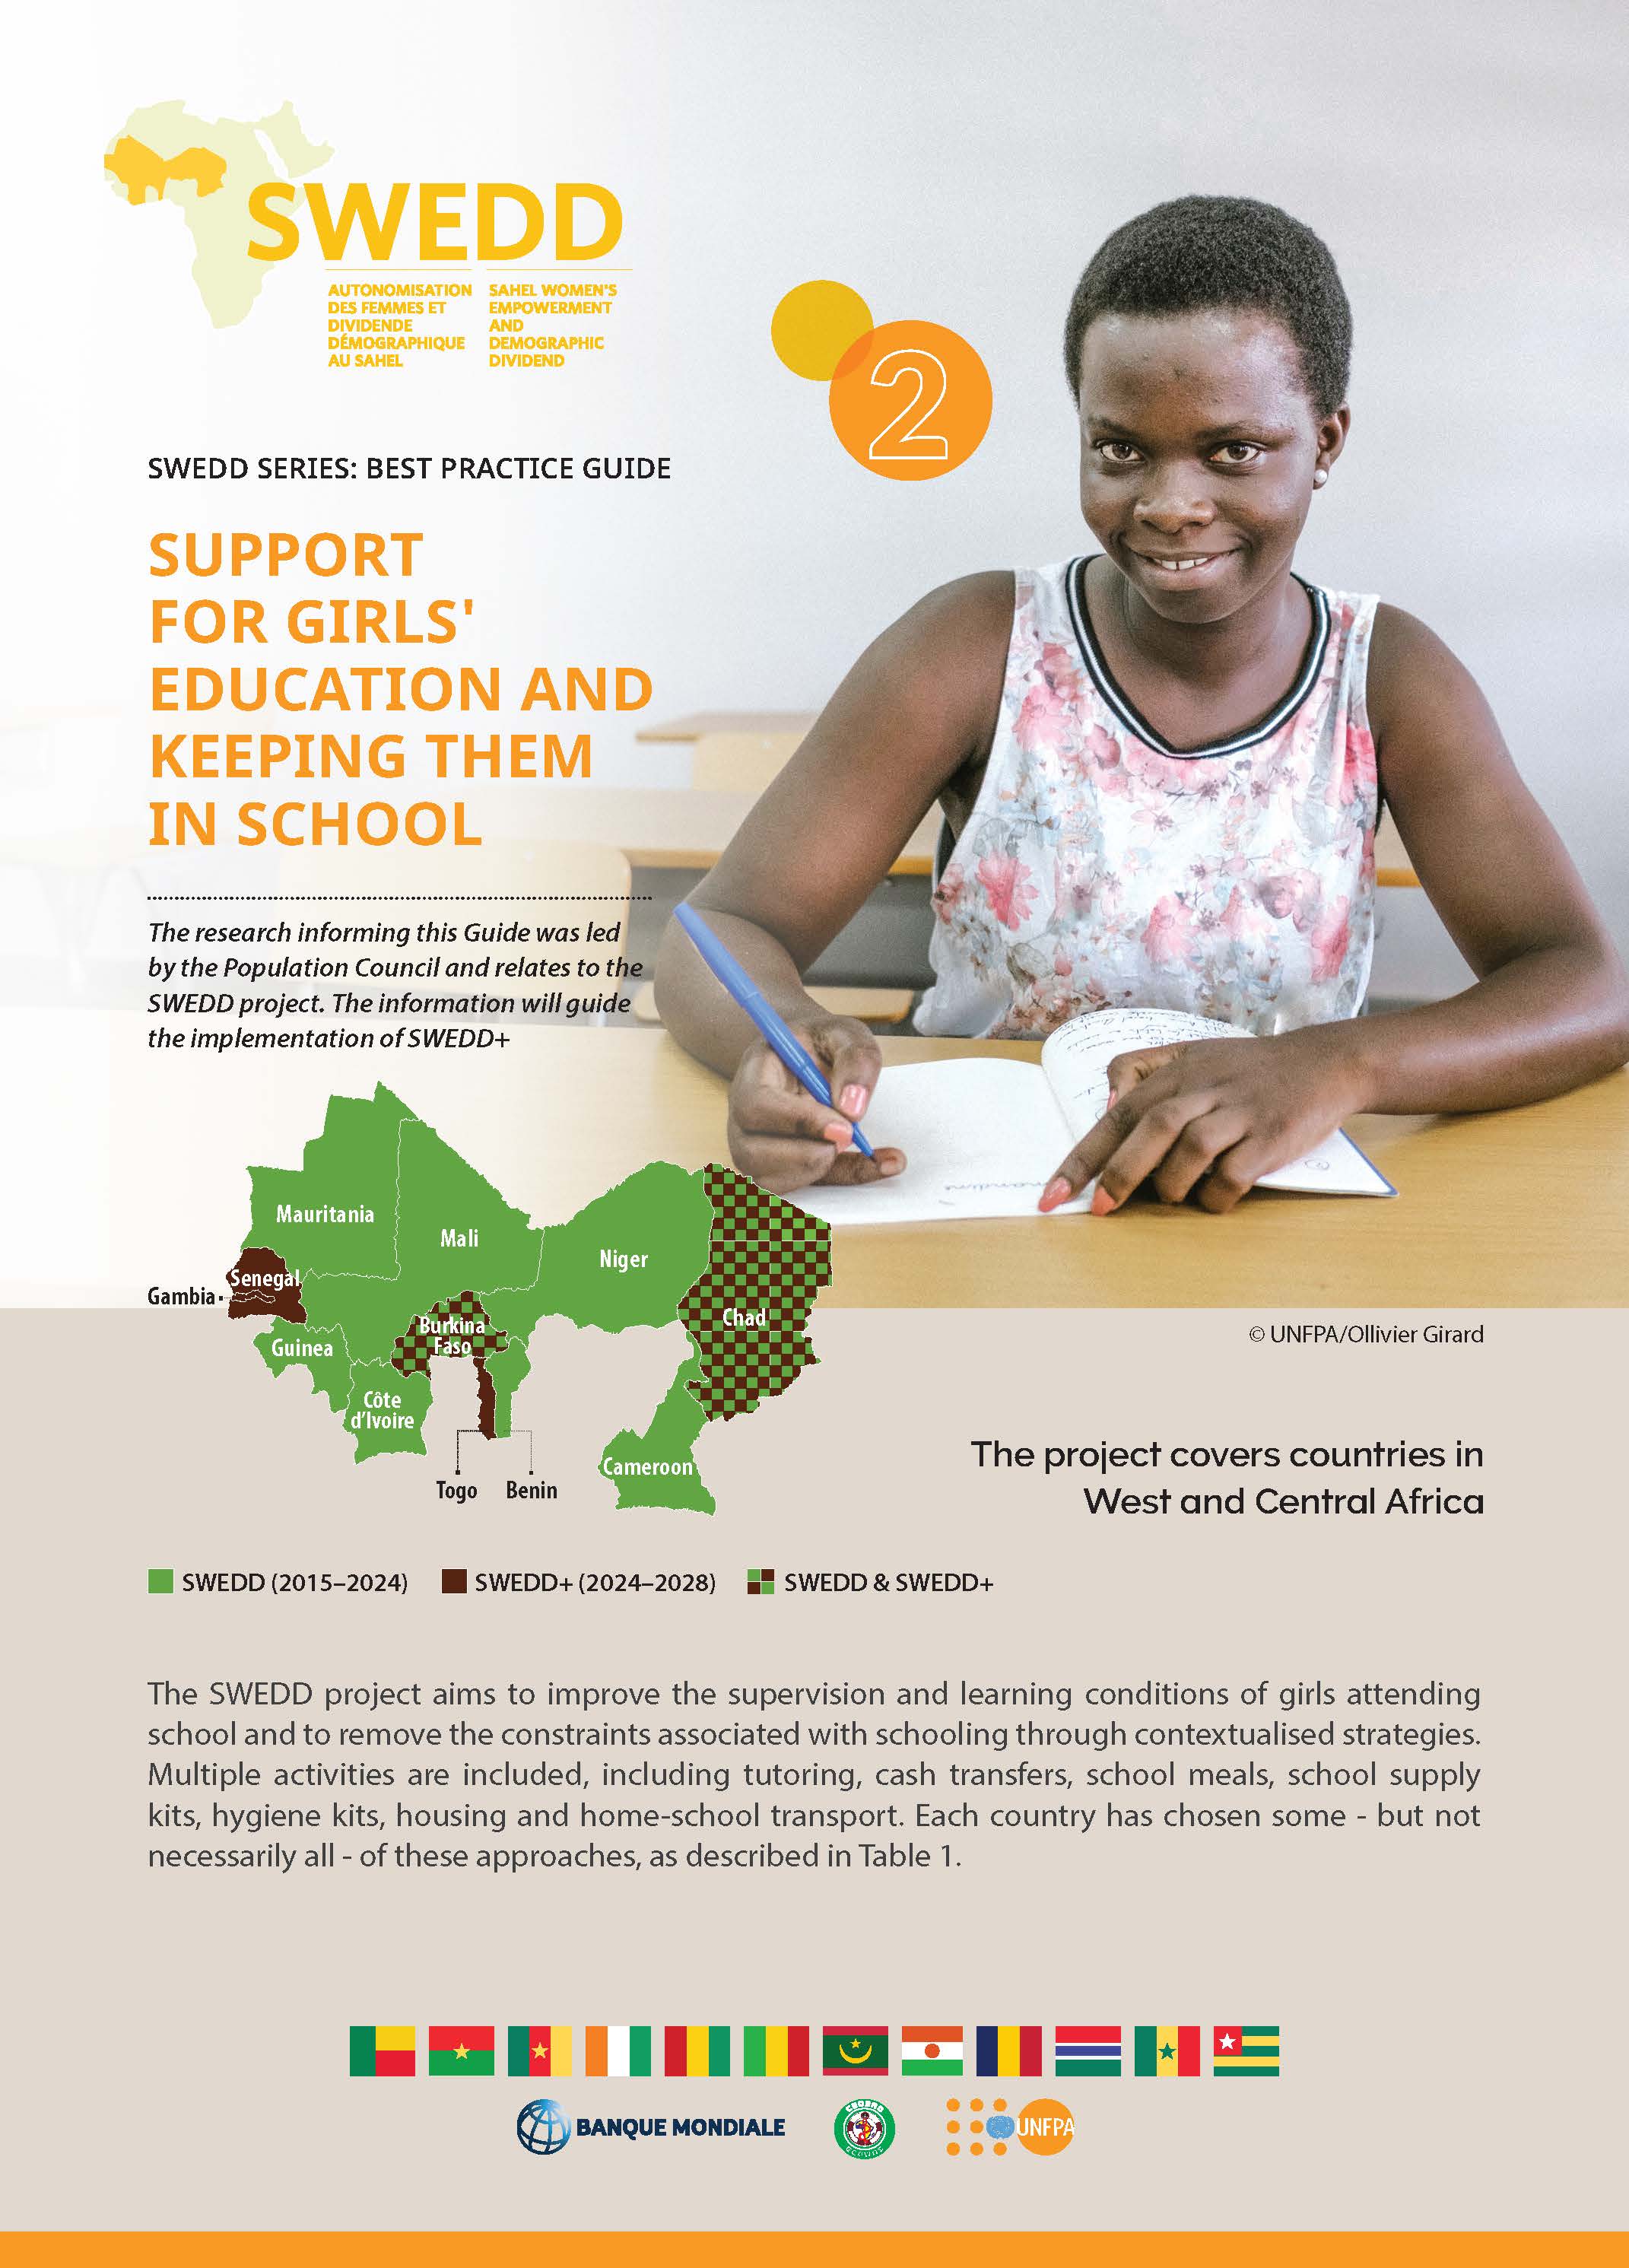 2. Support for girls' education and keeping them in school